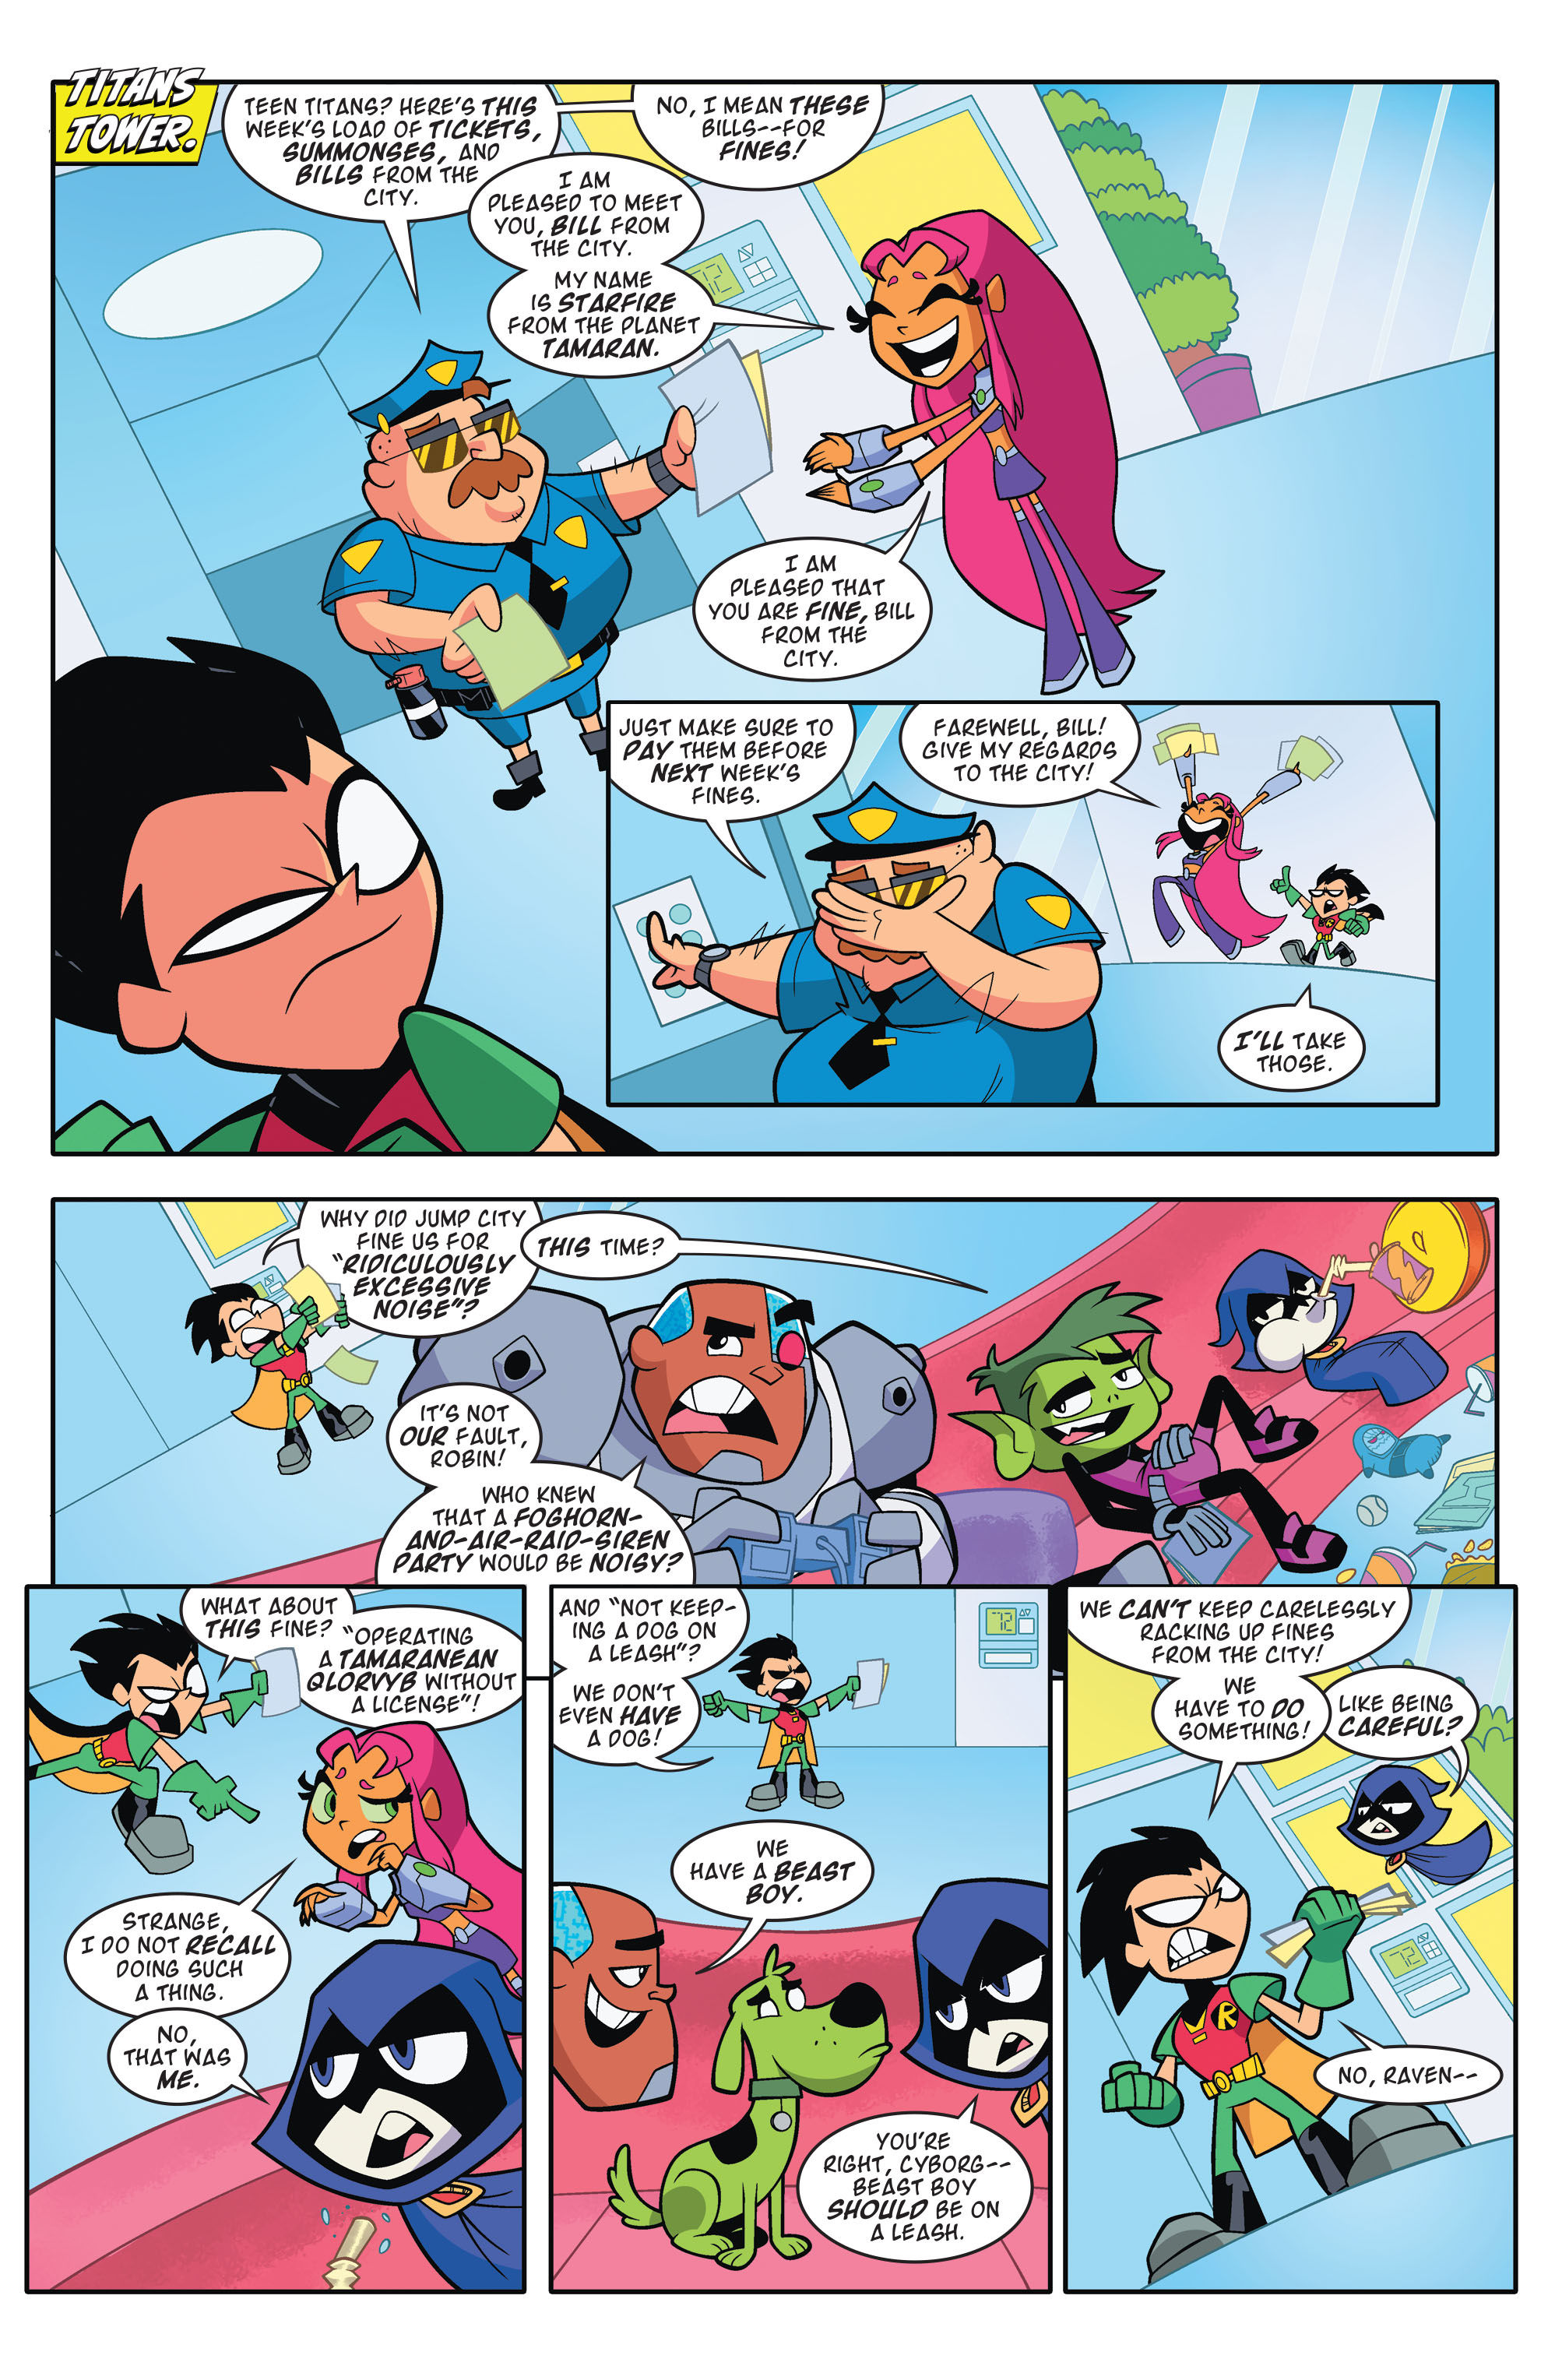 Teen Titans Go!: Booyah! (2020-): Chapter 2 - Page 2